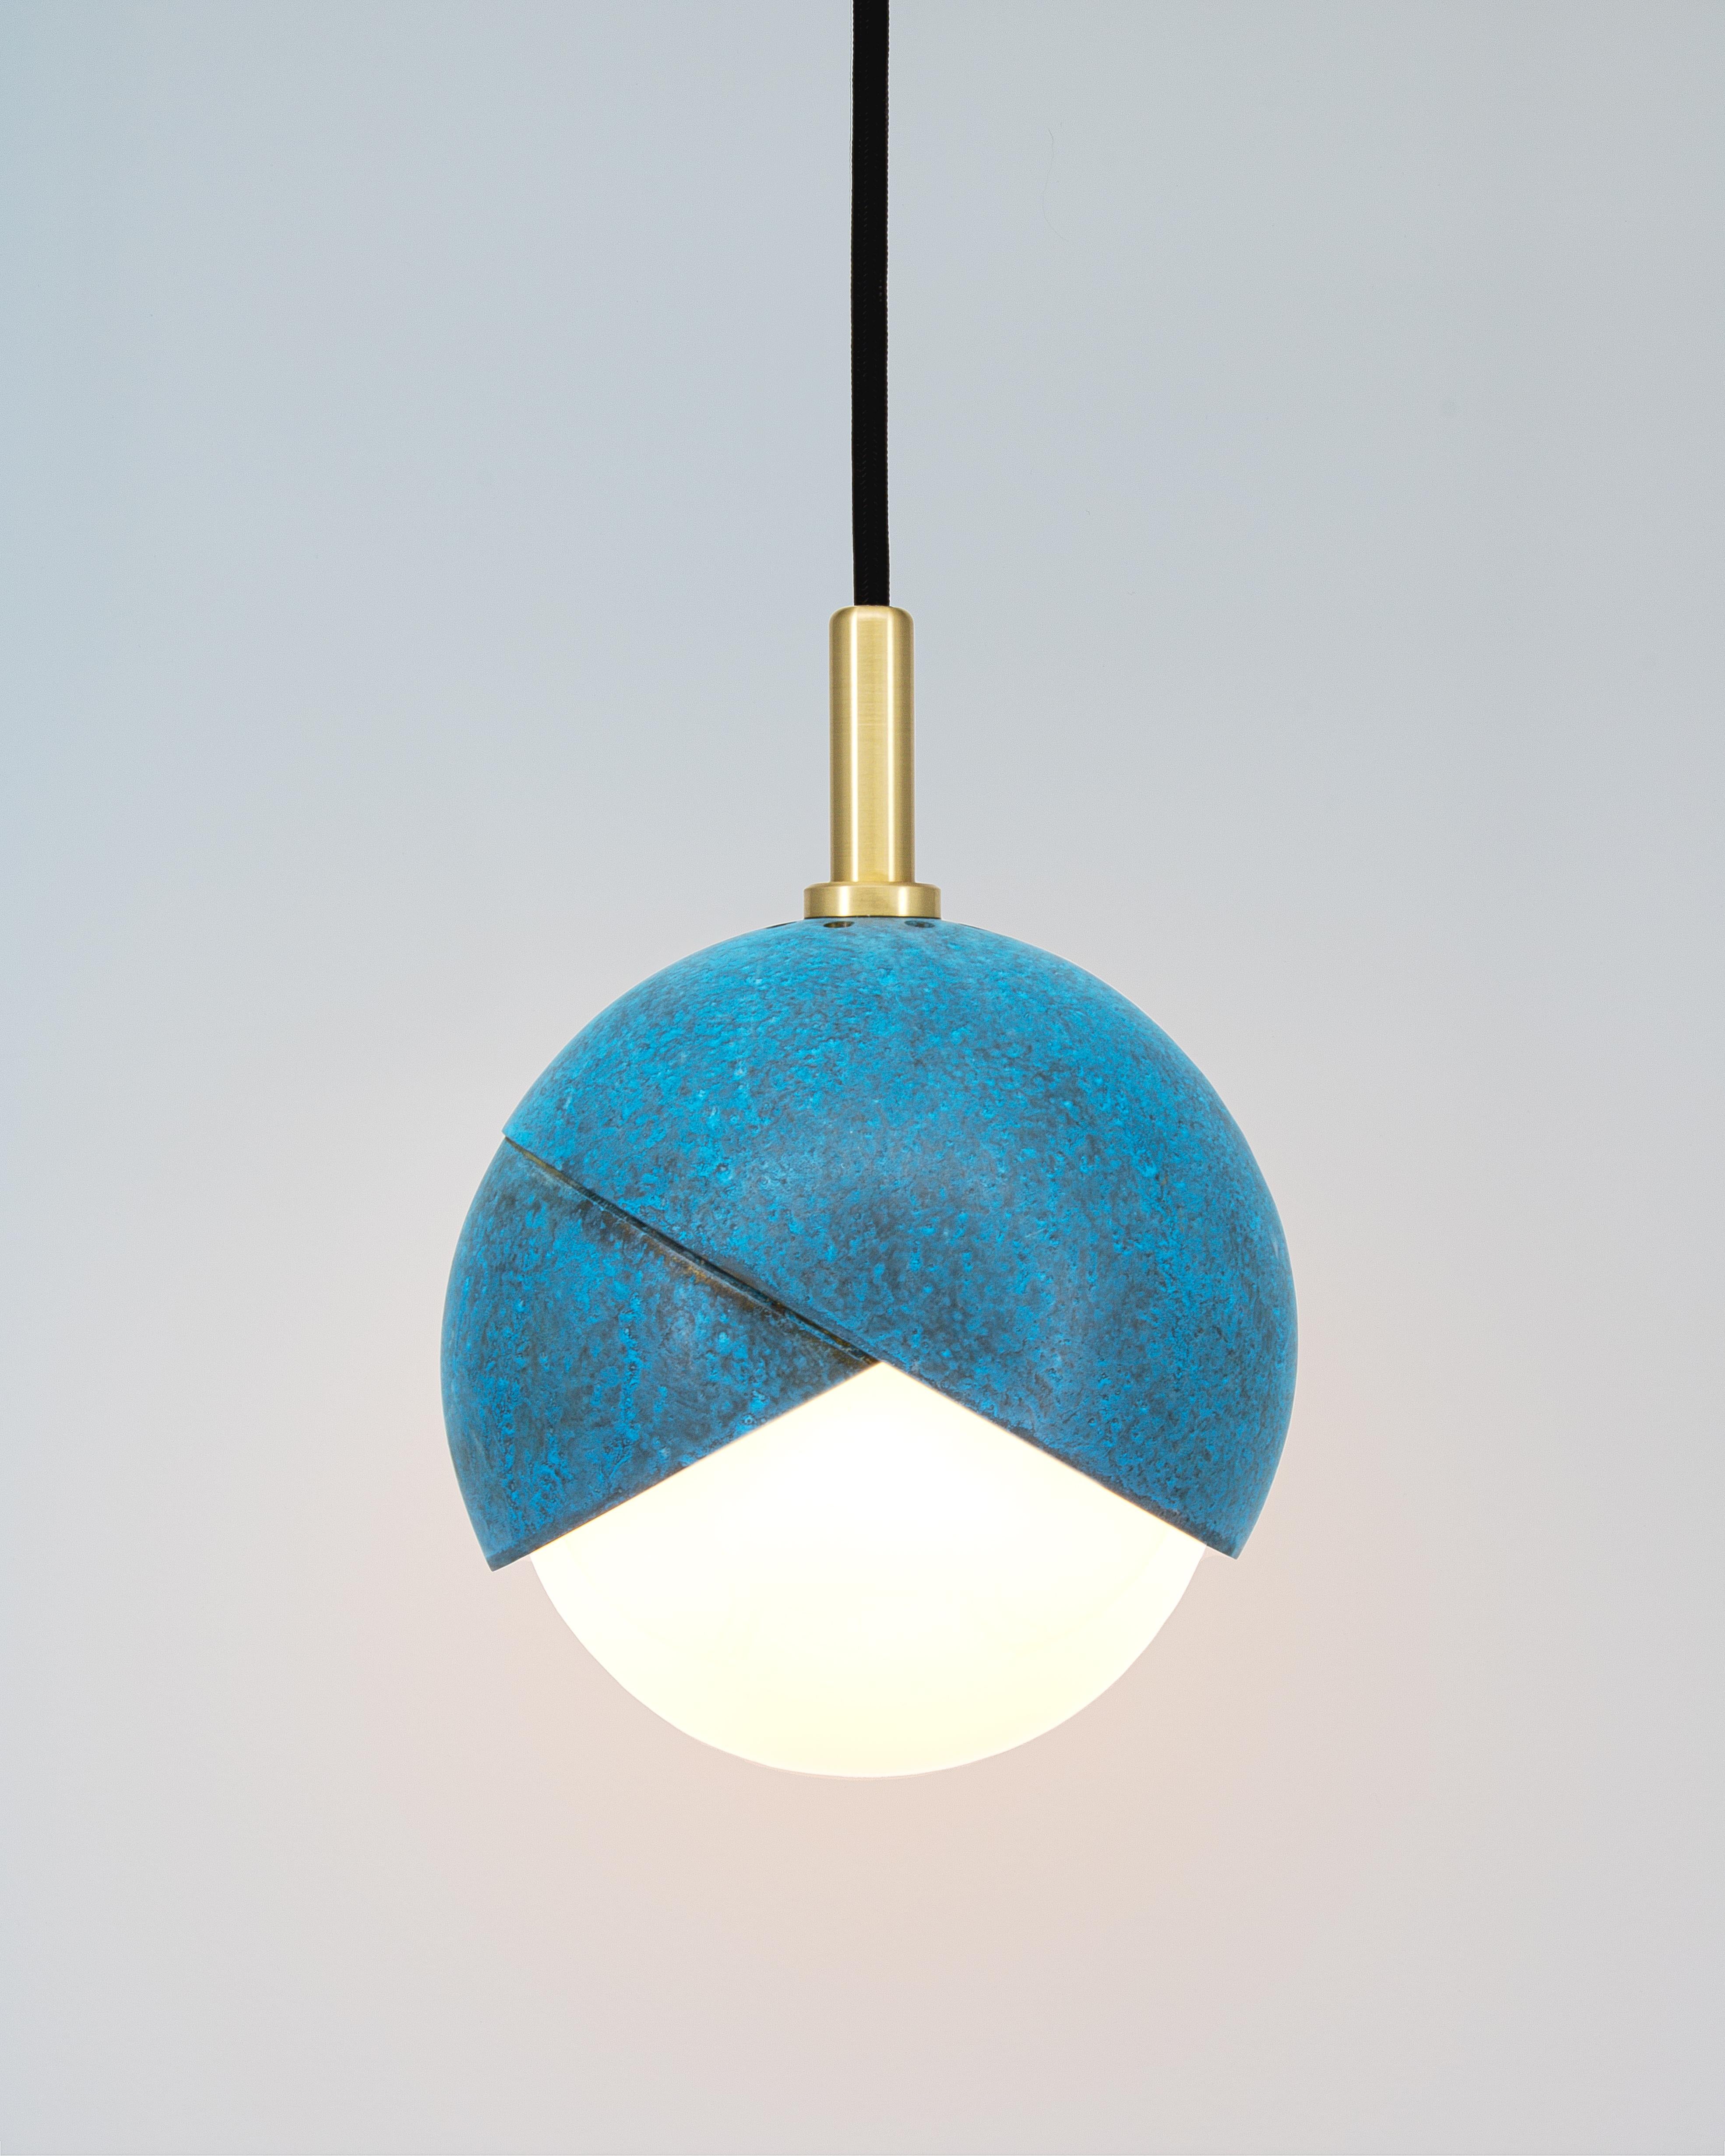 The Benedict™ Pendant light celebrates the defining detail of the Benedict™ Series. Two nested spun brass hemispheres cradle a hand blown glass globe. This light fixture lends itself to creative configuration of our many finishes meaning it’s sure